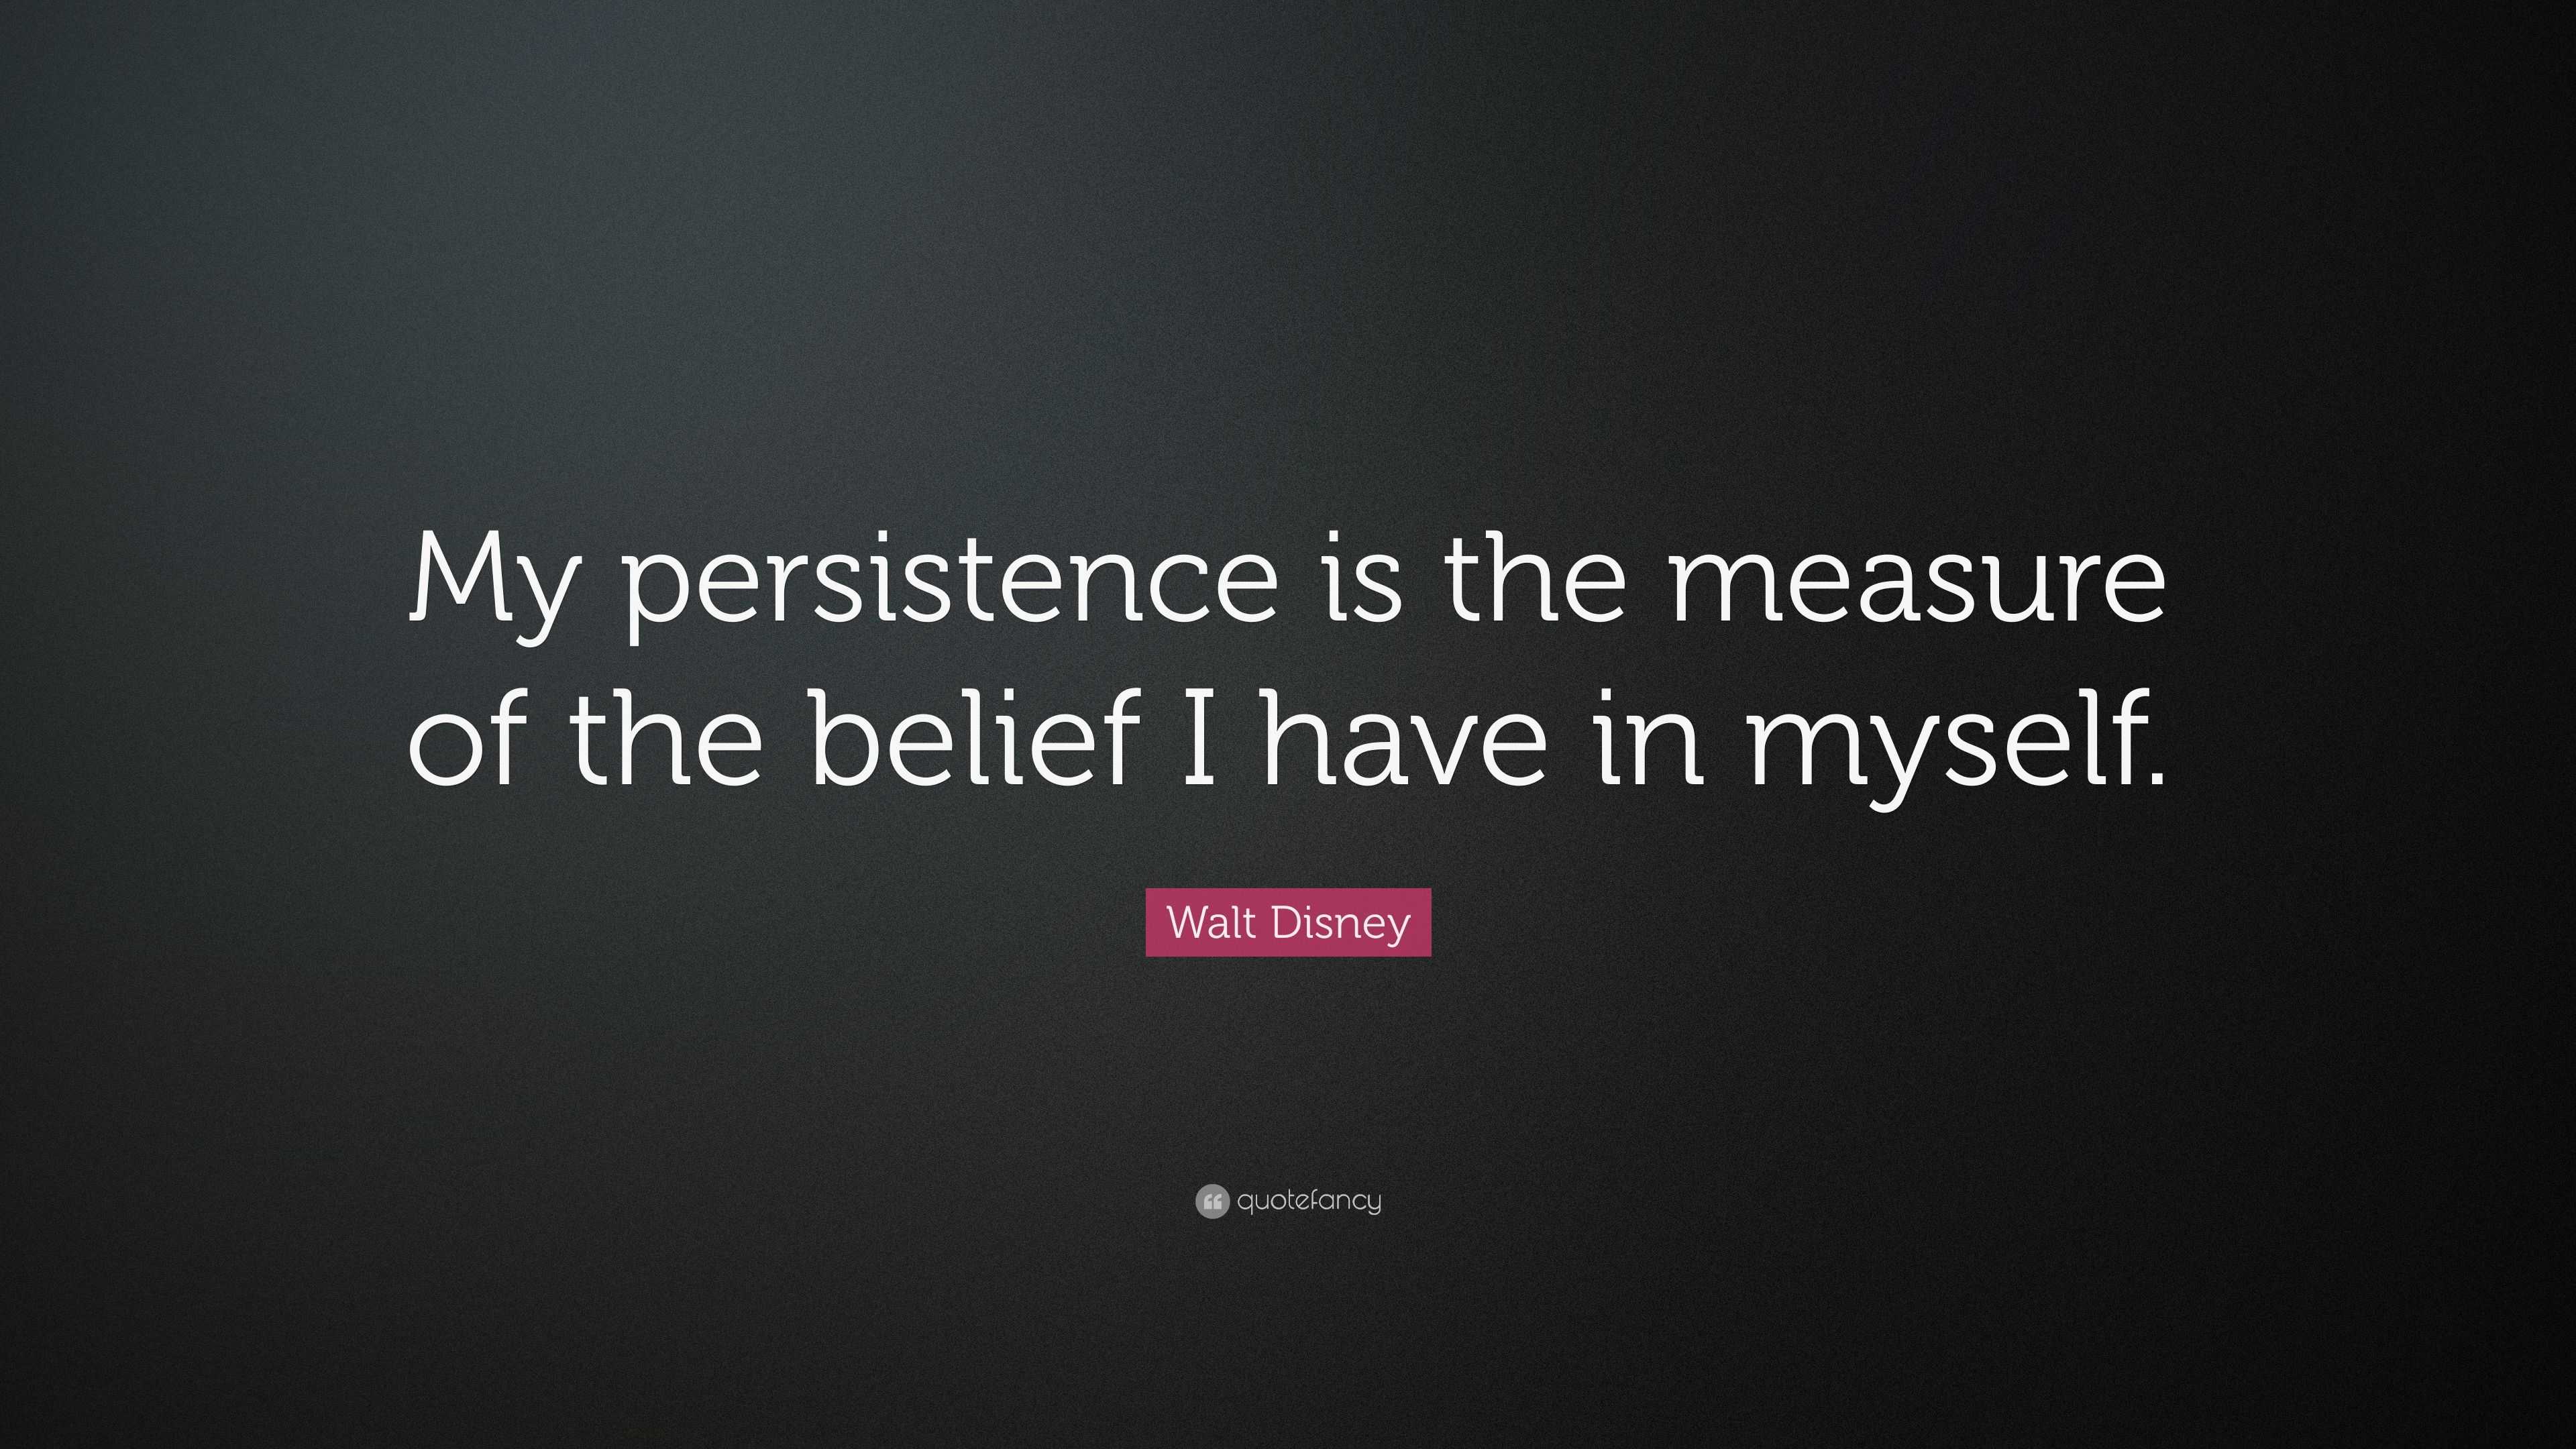 Walt Disney Quote: “My persistence is the measure of the belief I have ...